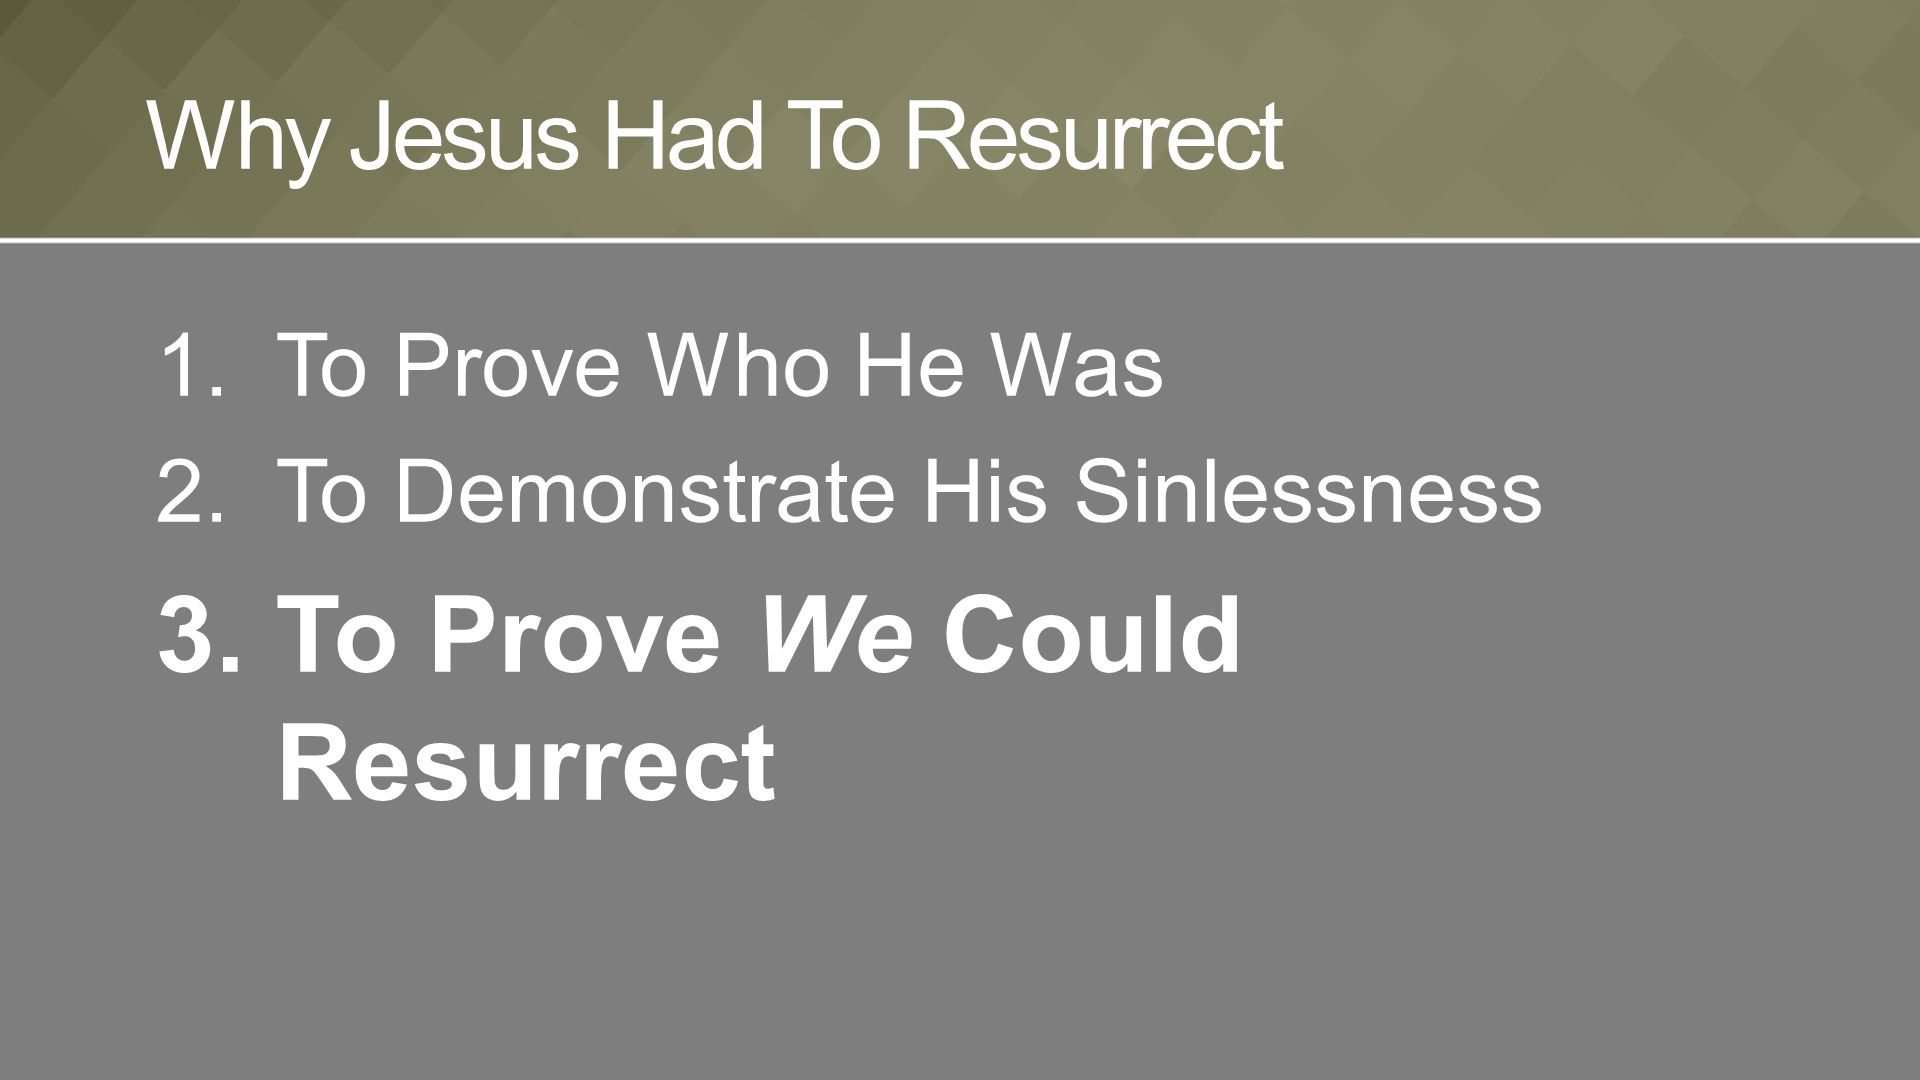 1.To Prove Who He Was 2.To Demonstrate His Sinlessness 3.To Prove We Could Resurrect Why Jesus Had To Resurrect